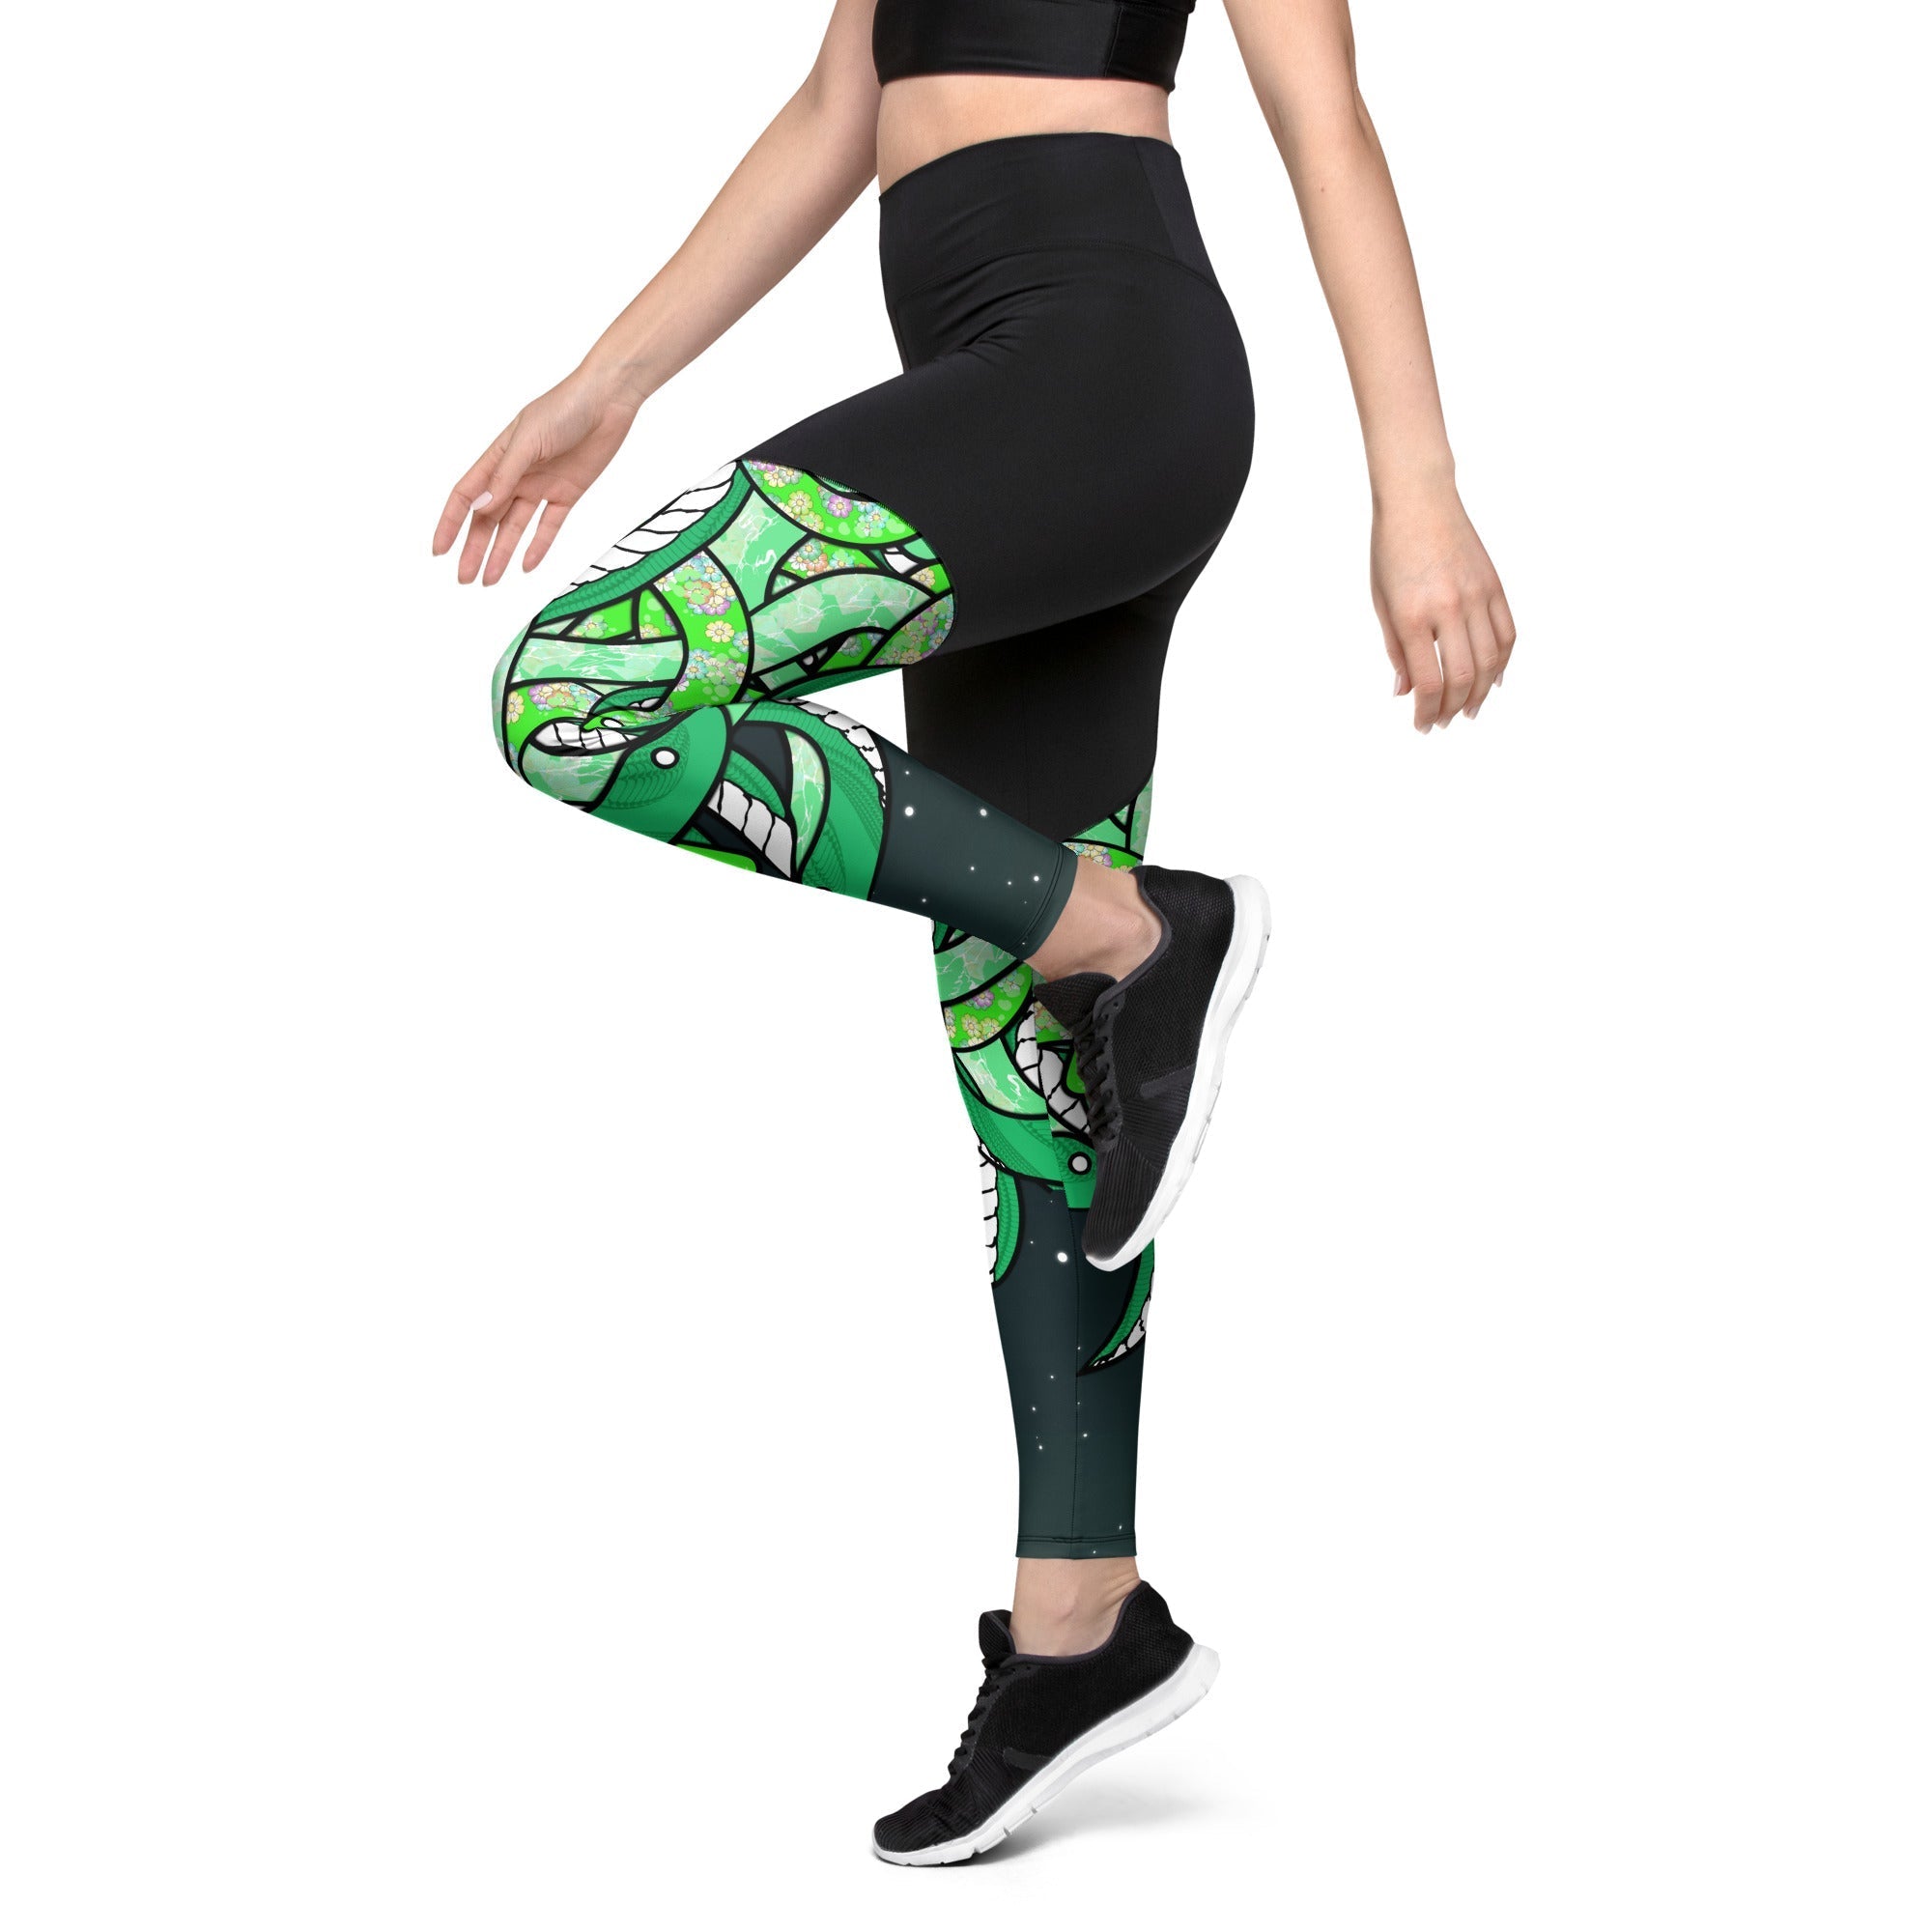 Tangled Snakes Compression Leggings